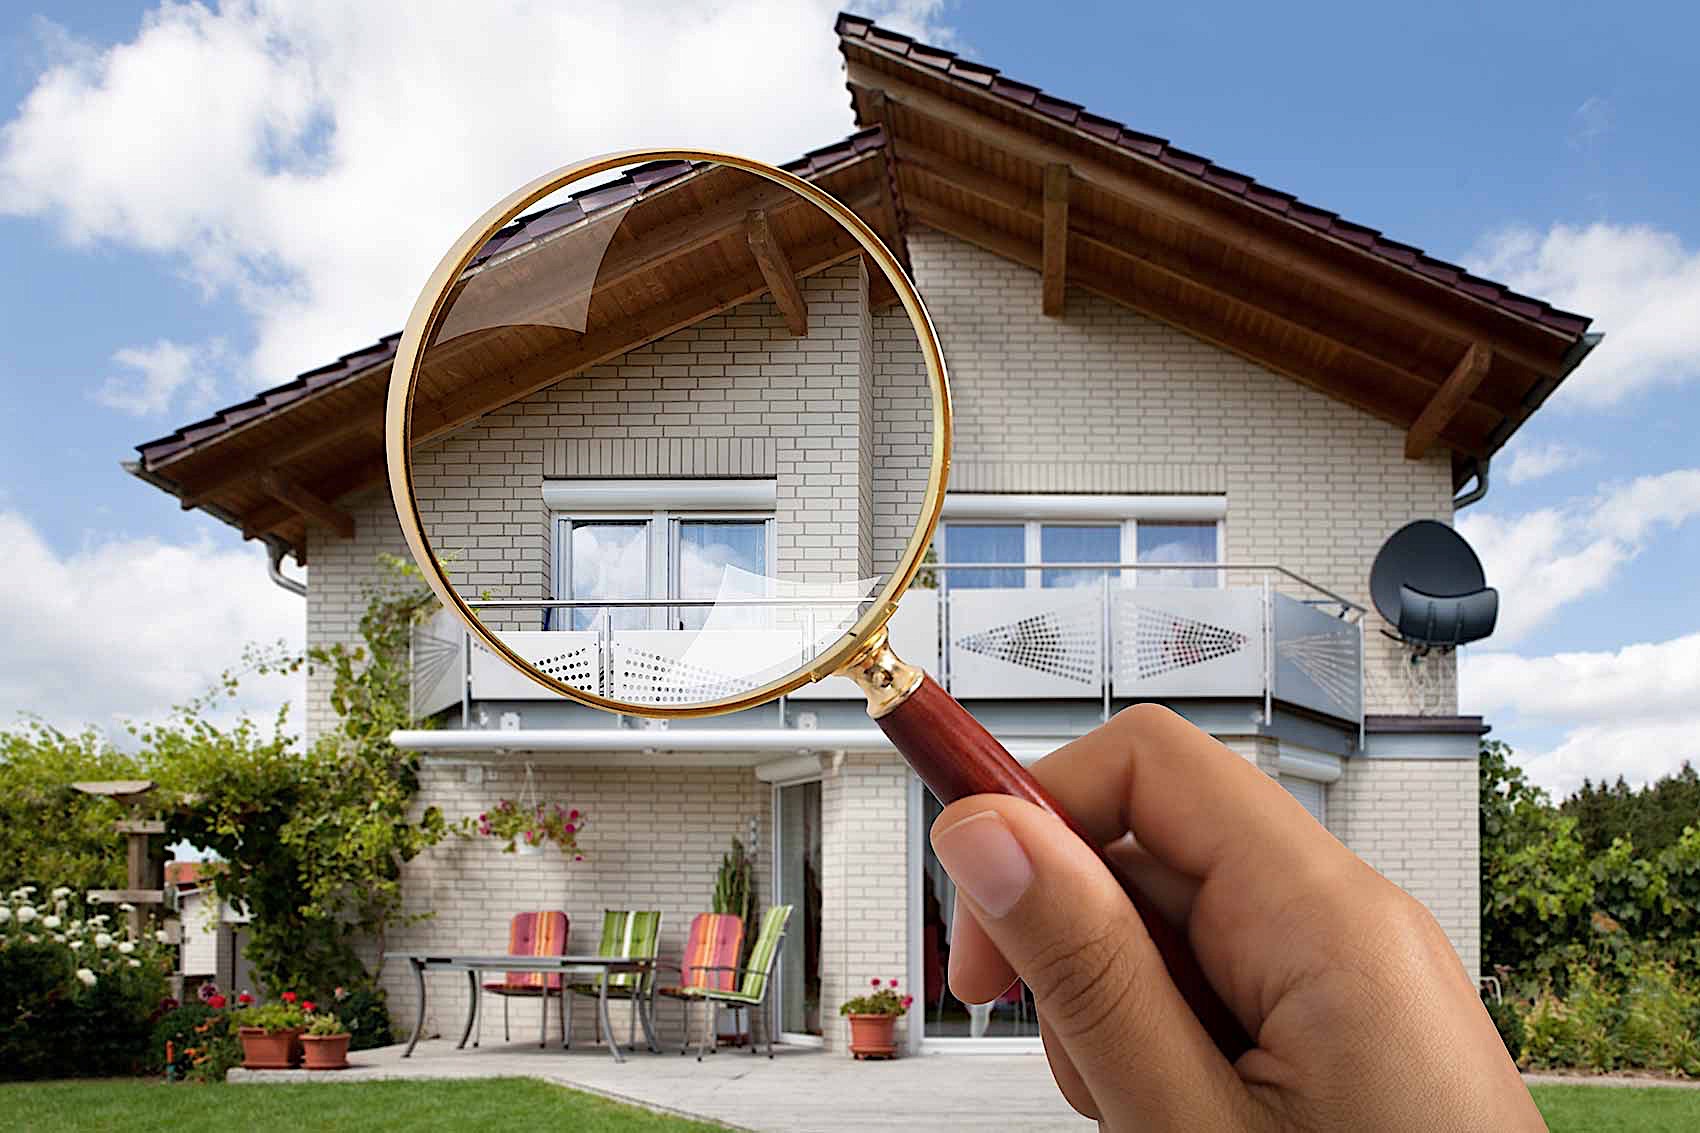 Should Buyers Waive Home Inspection as a Buying Strategy